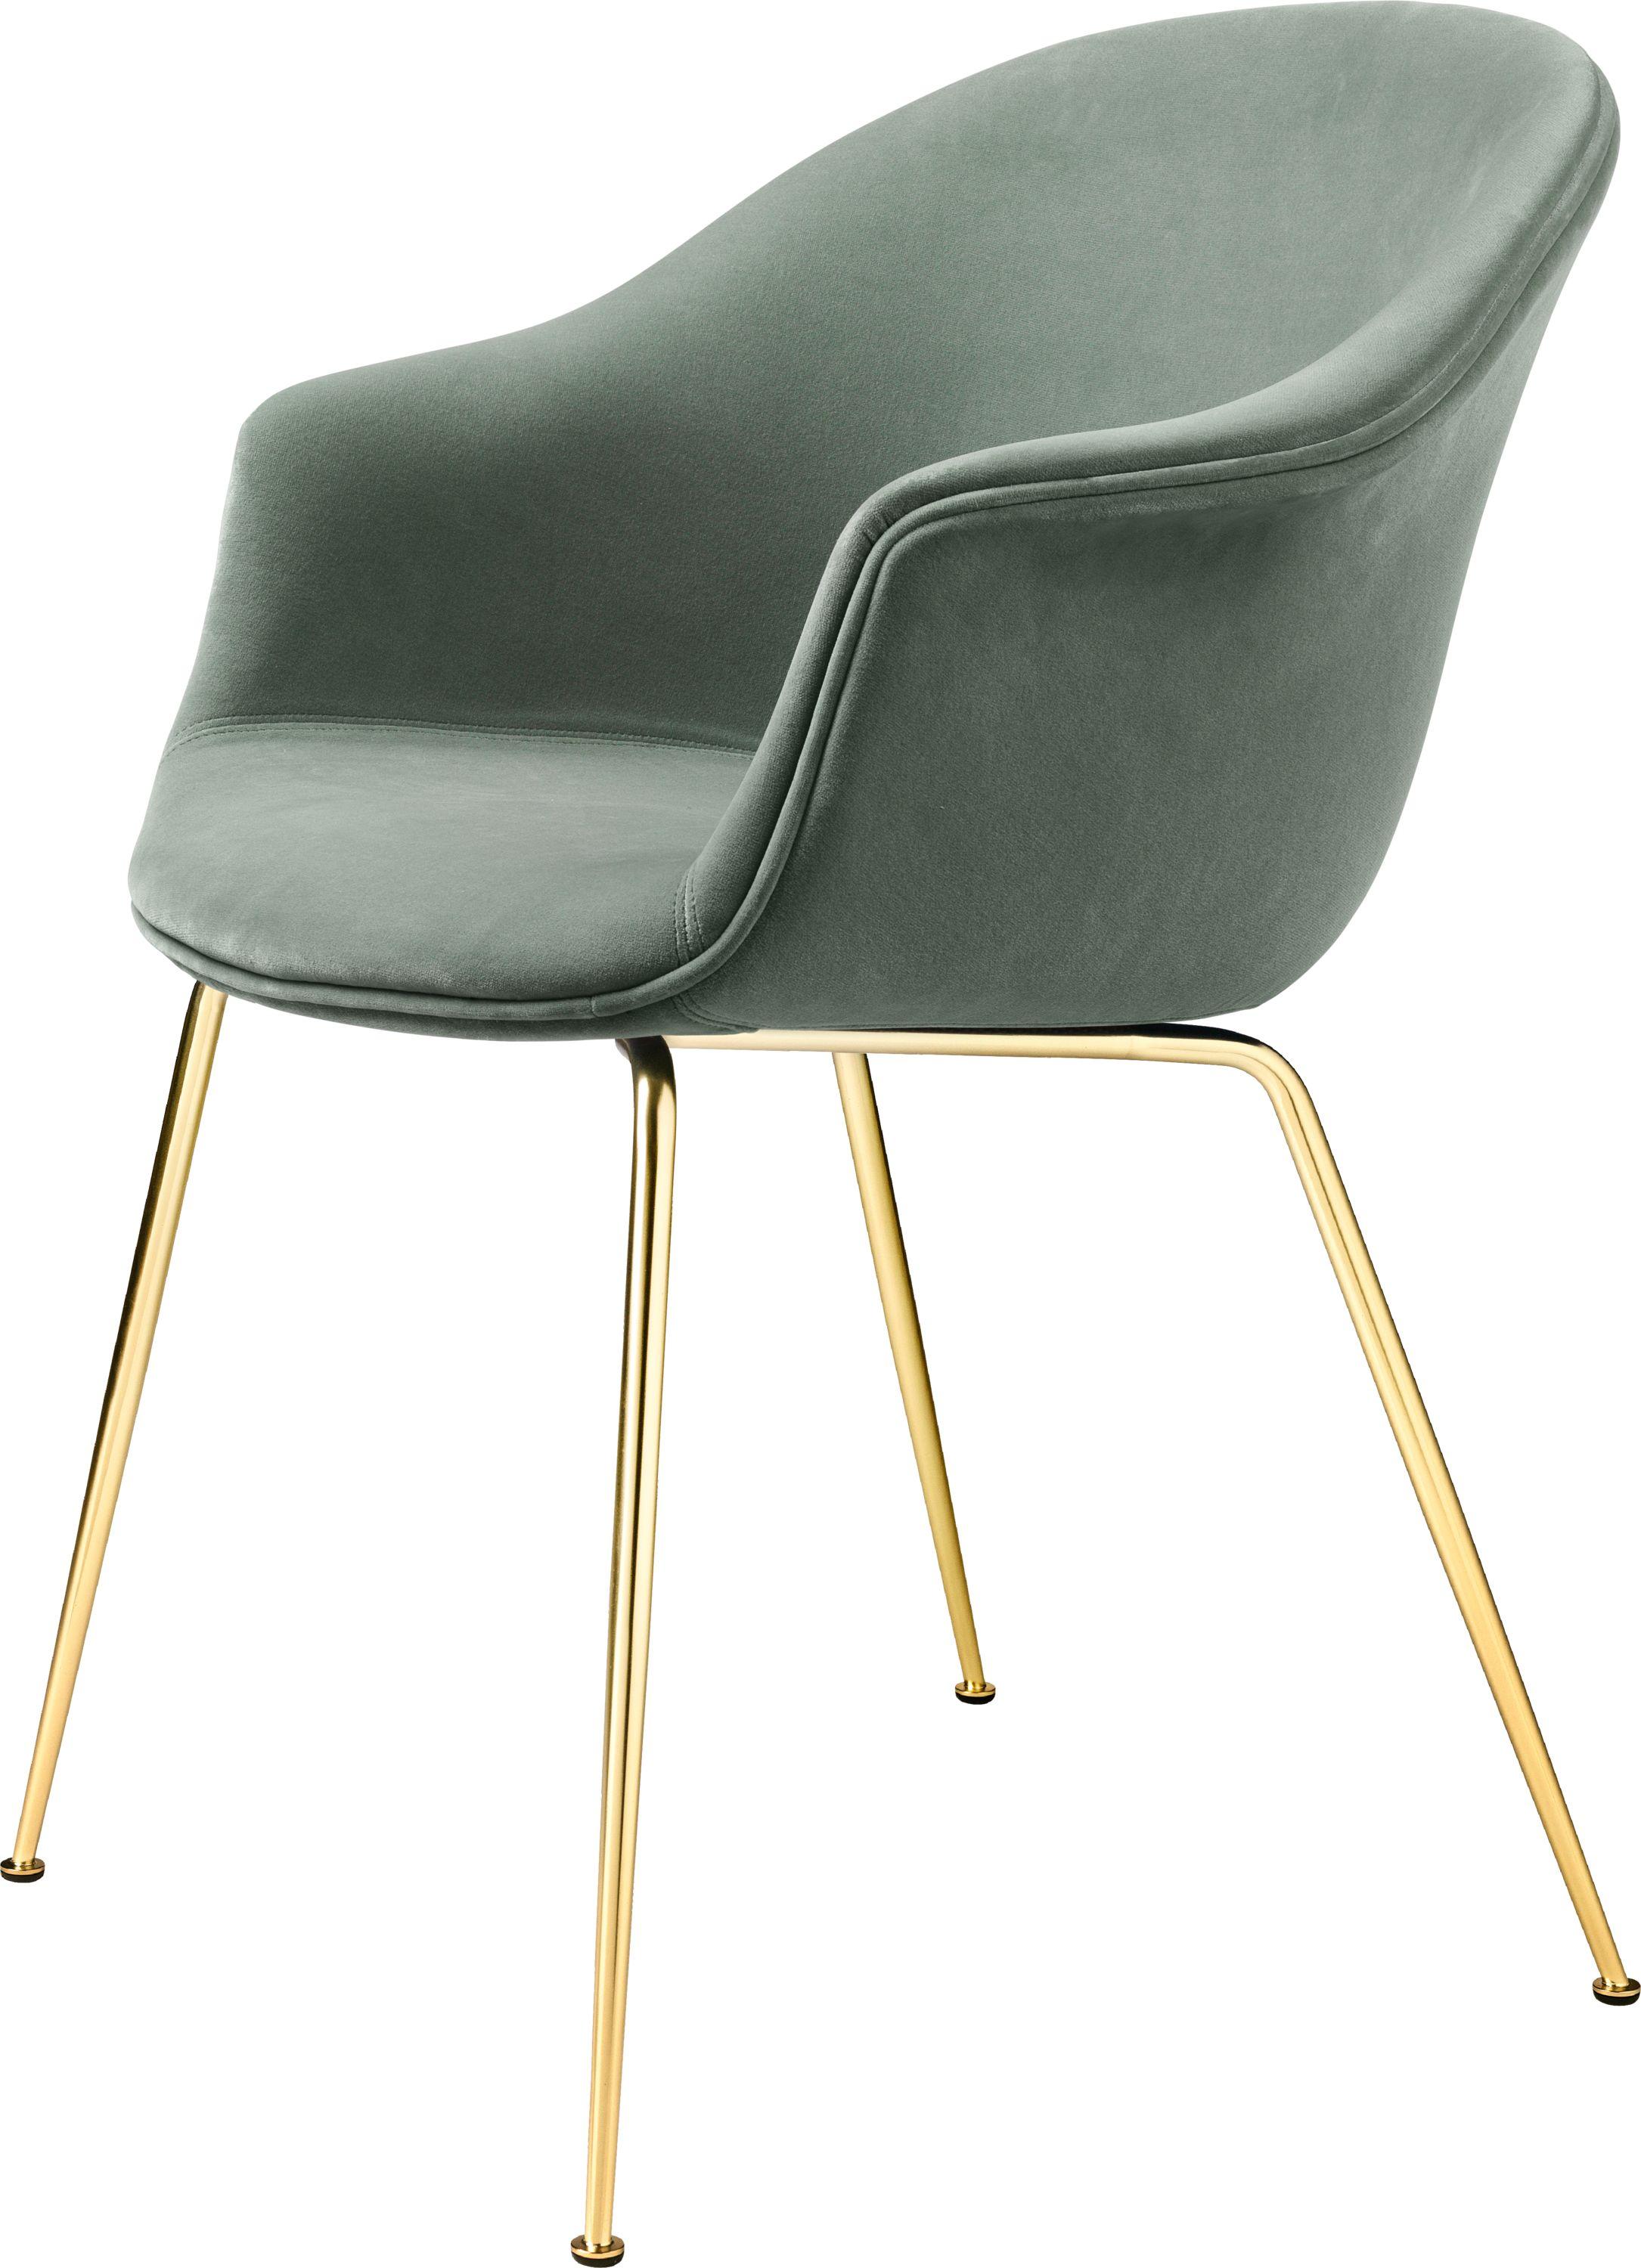 GamFratesi 'Bat' Dining Chair in Brown with Antique Brass Conic Base 5